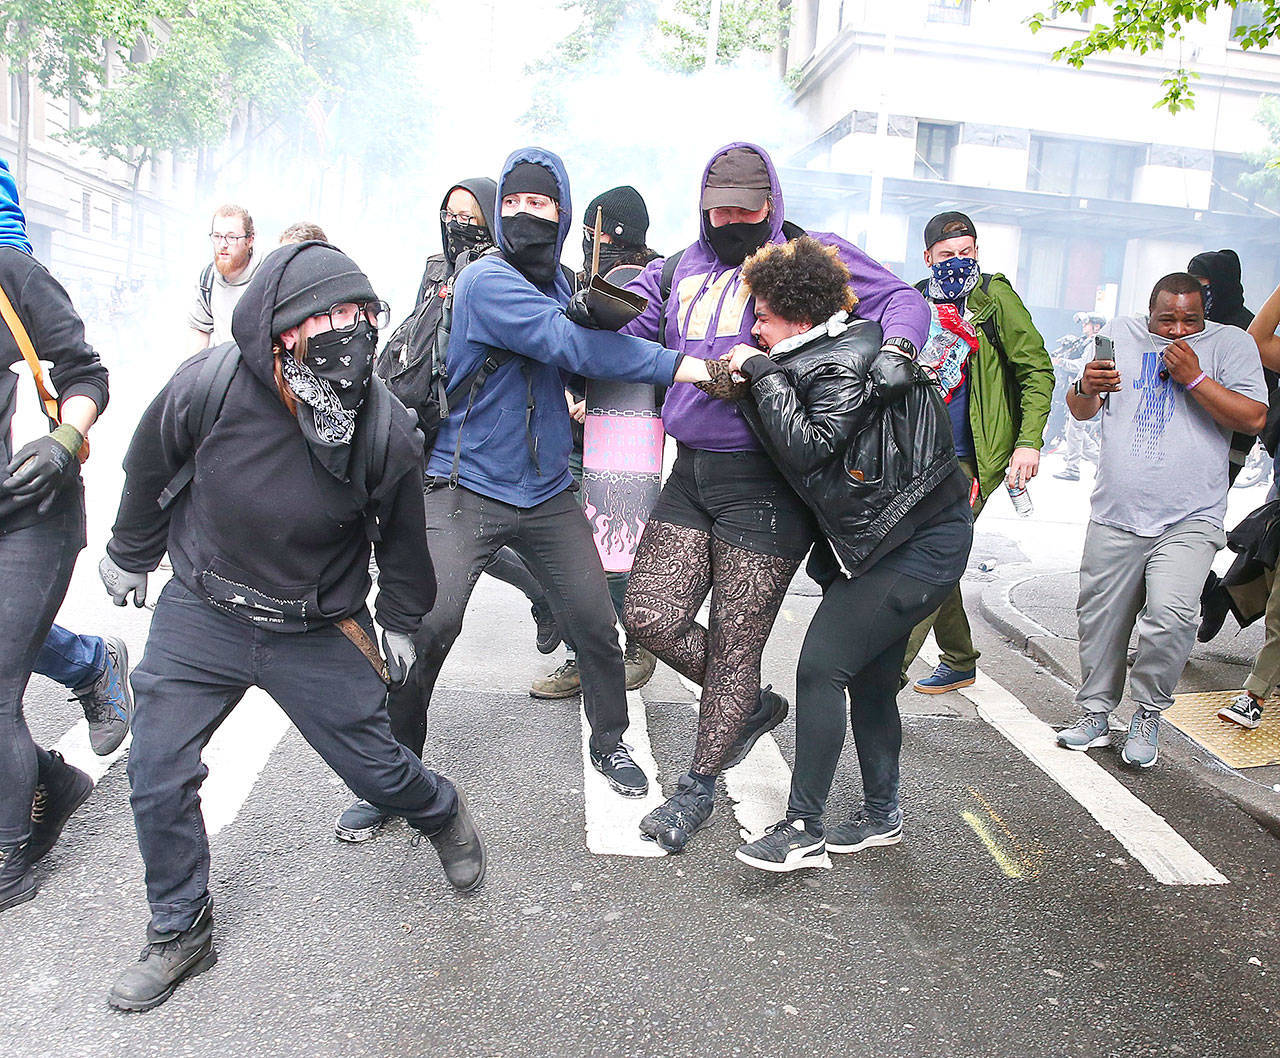 Protesters run from flashbangs in downtown Seattle on May 31 during protests over the death of George Floyd in Minneapolis. (Ken Lambert/Seattle Times)